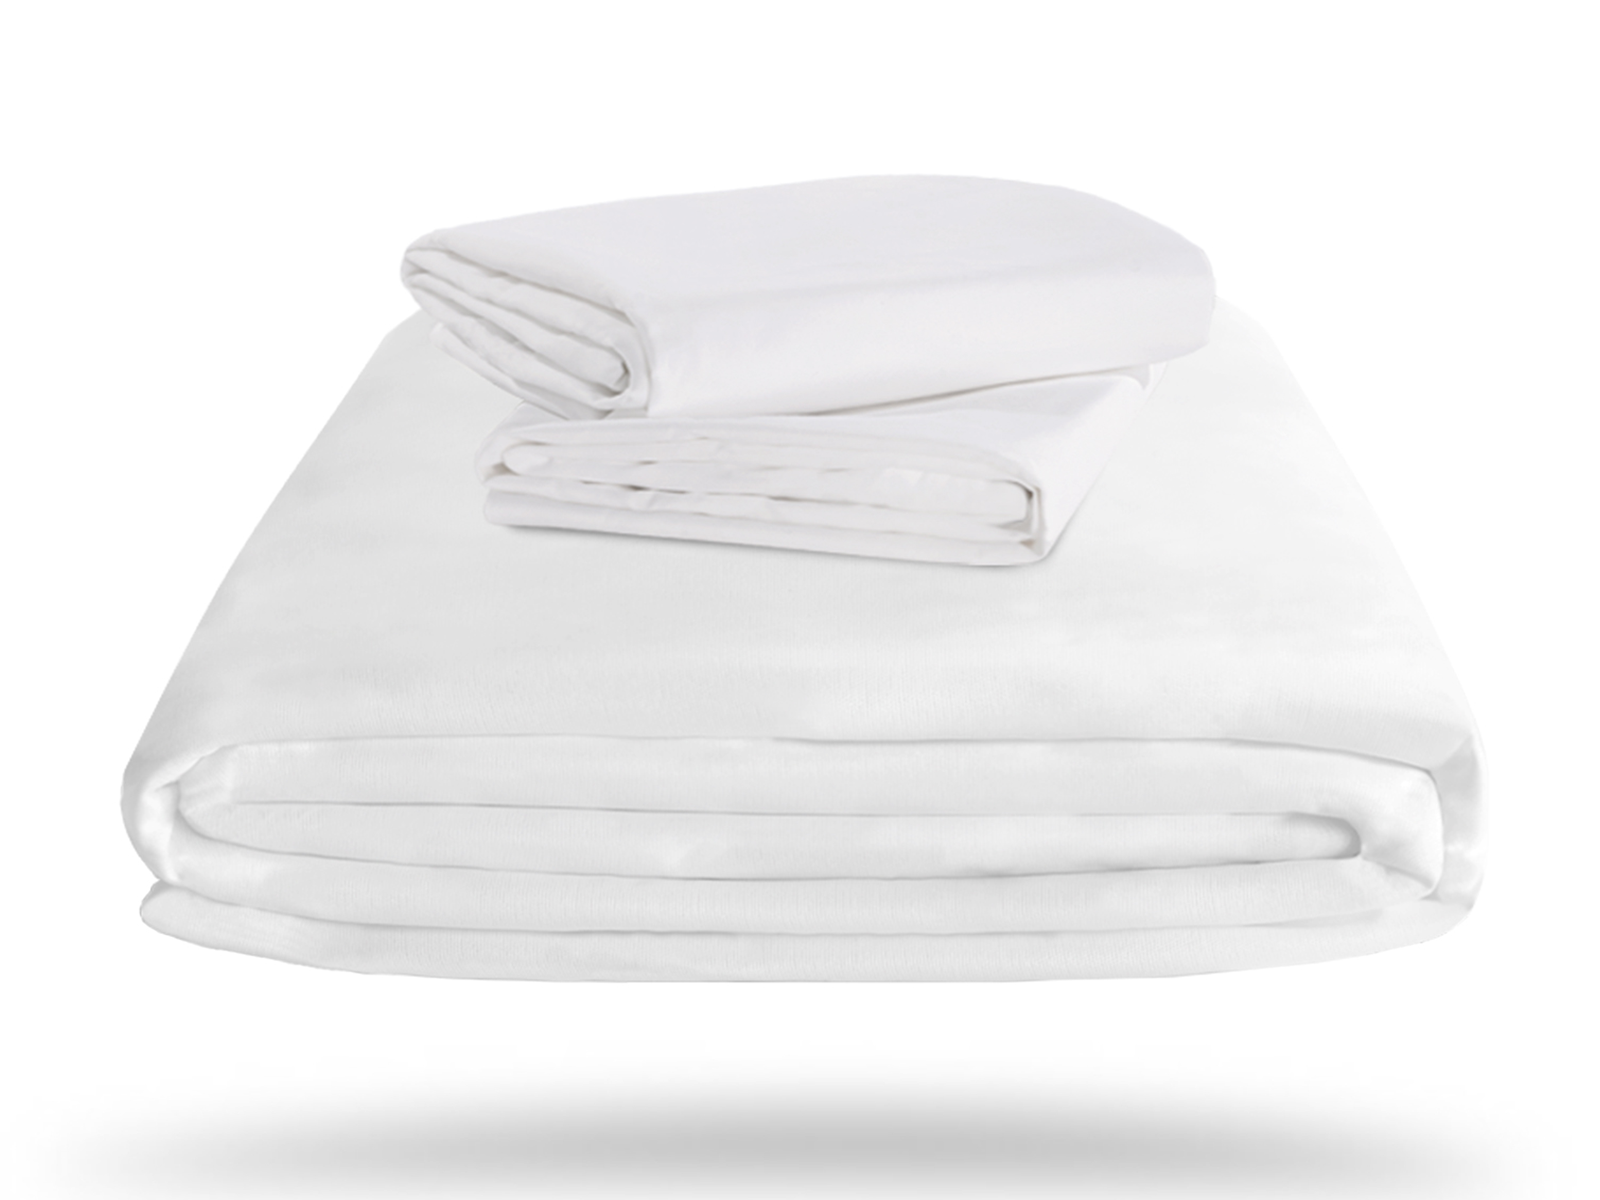 Bedgear Full Germshield Mattress and Pillow Cover Set | Antimicrobial